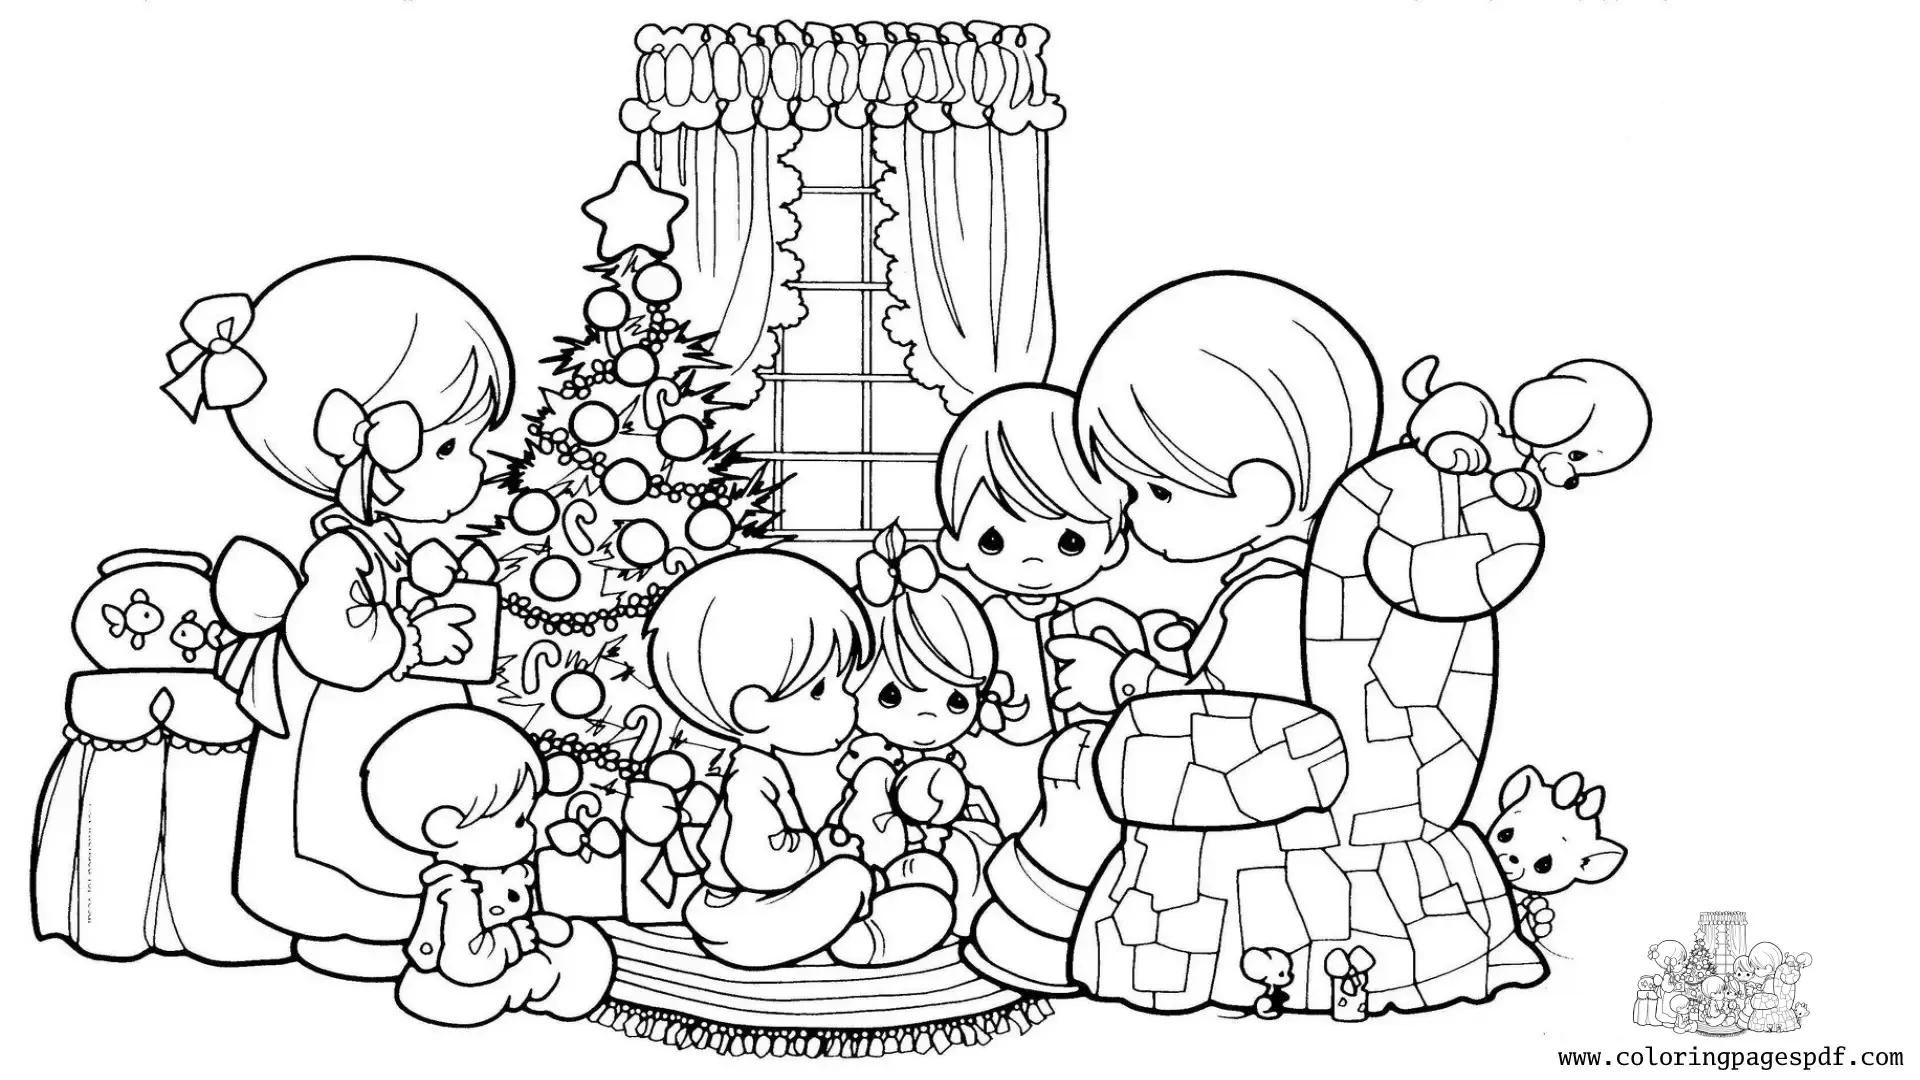 Coloring Page Of Kids Opening Their Christmas Presents